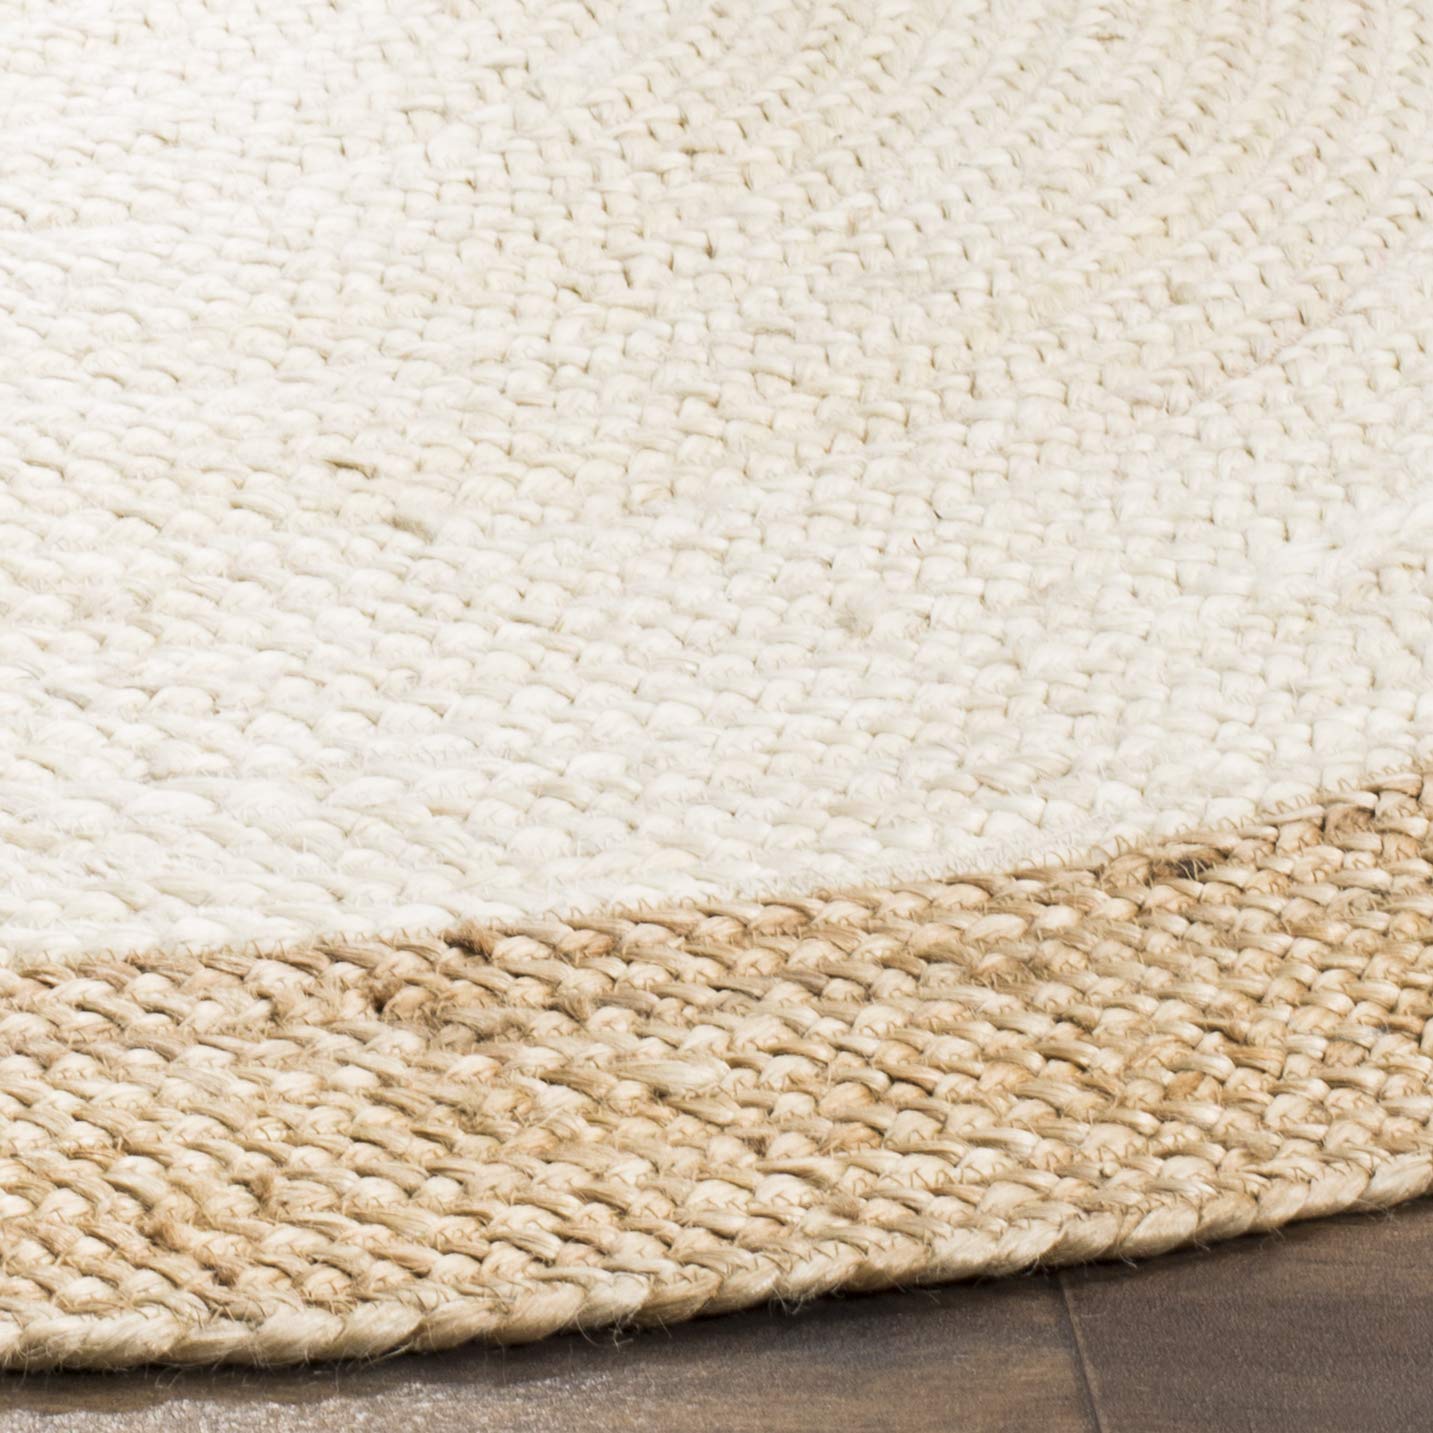 SAFAVIEH Natural Fiber Collection Area Rug - 4' Round, Ivory & Natural, Handmade Boho Braided Jute, Ideal for High Traffic Areas in Living Room, Bedroom (NF801M)